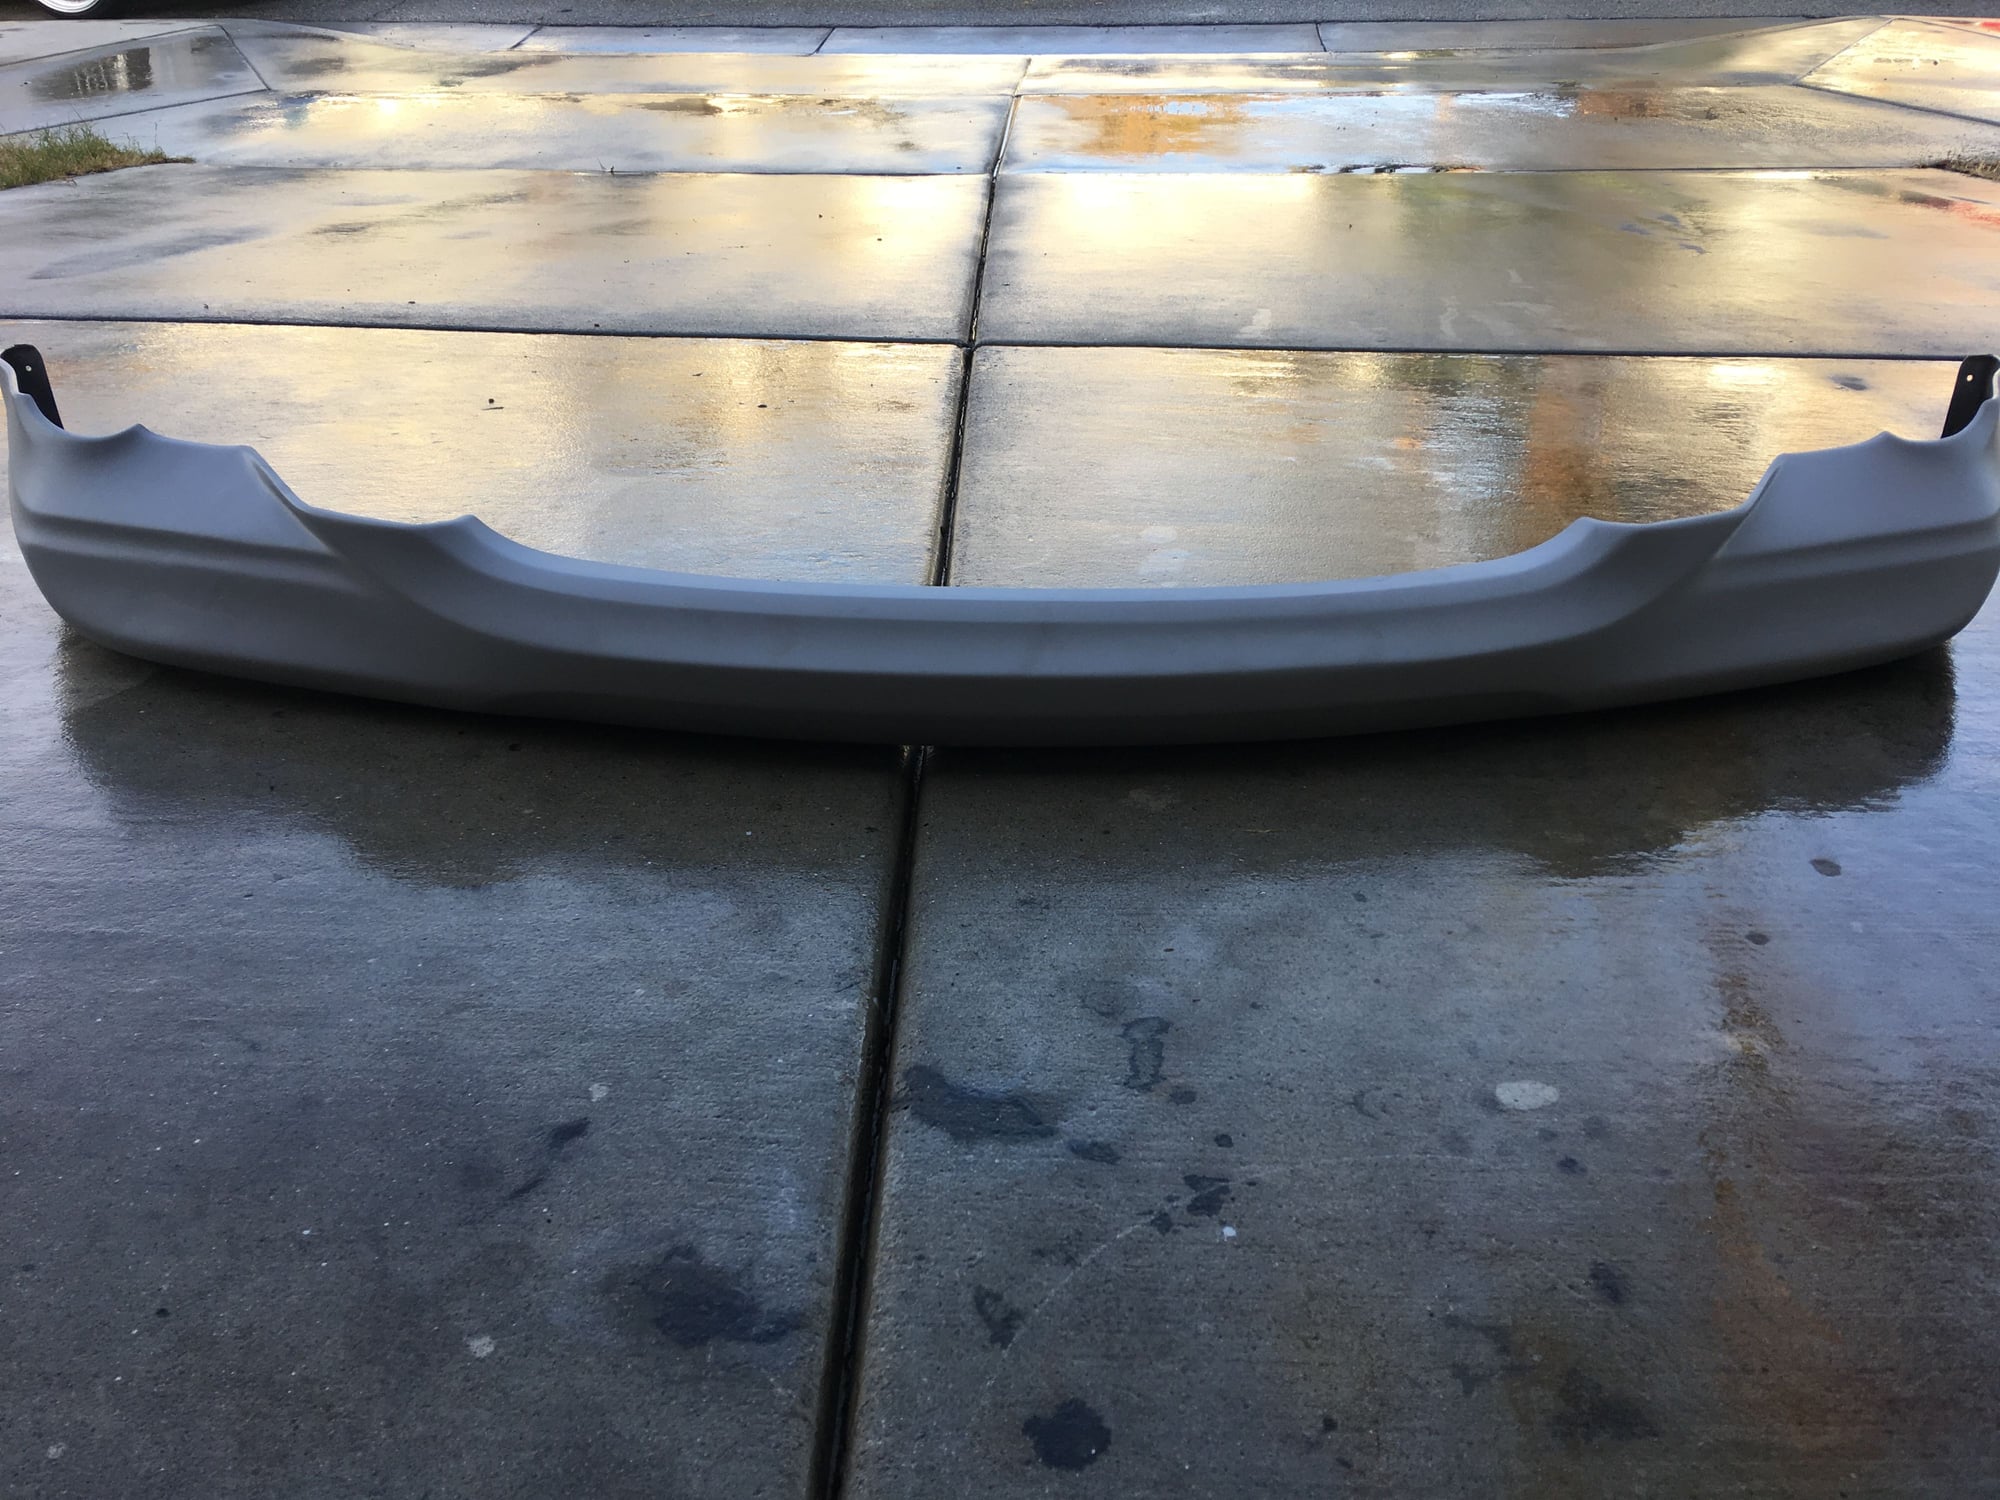 Exterior Body Parts - 06-08 IS350 Authentic INGS front Lip - Used - 2006 to 2008 Lexus IS350 - San Jacinto, CA 92583, United States